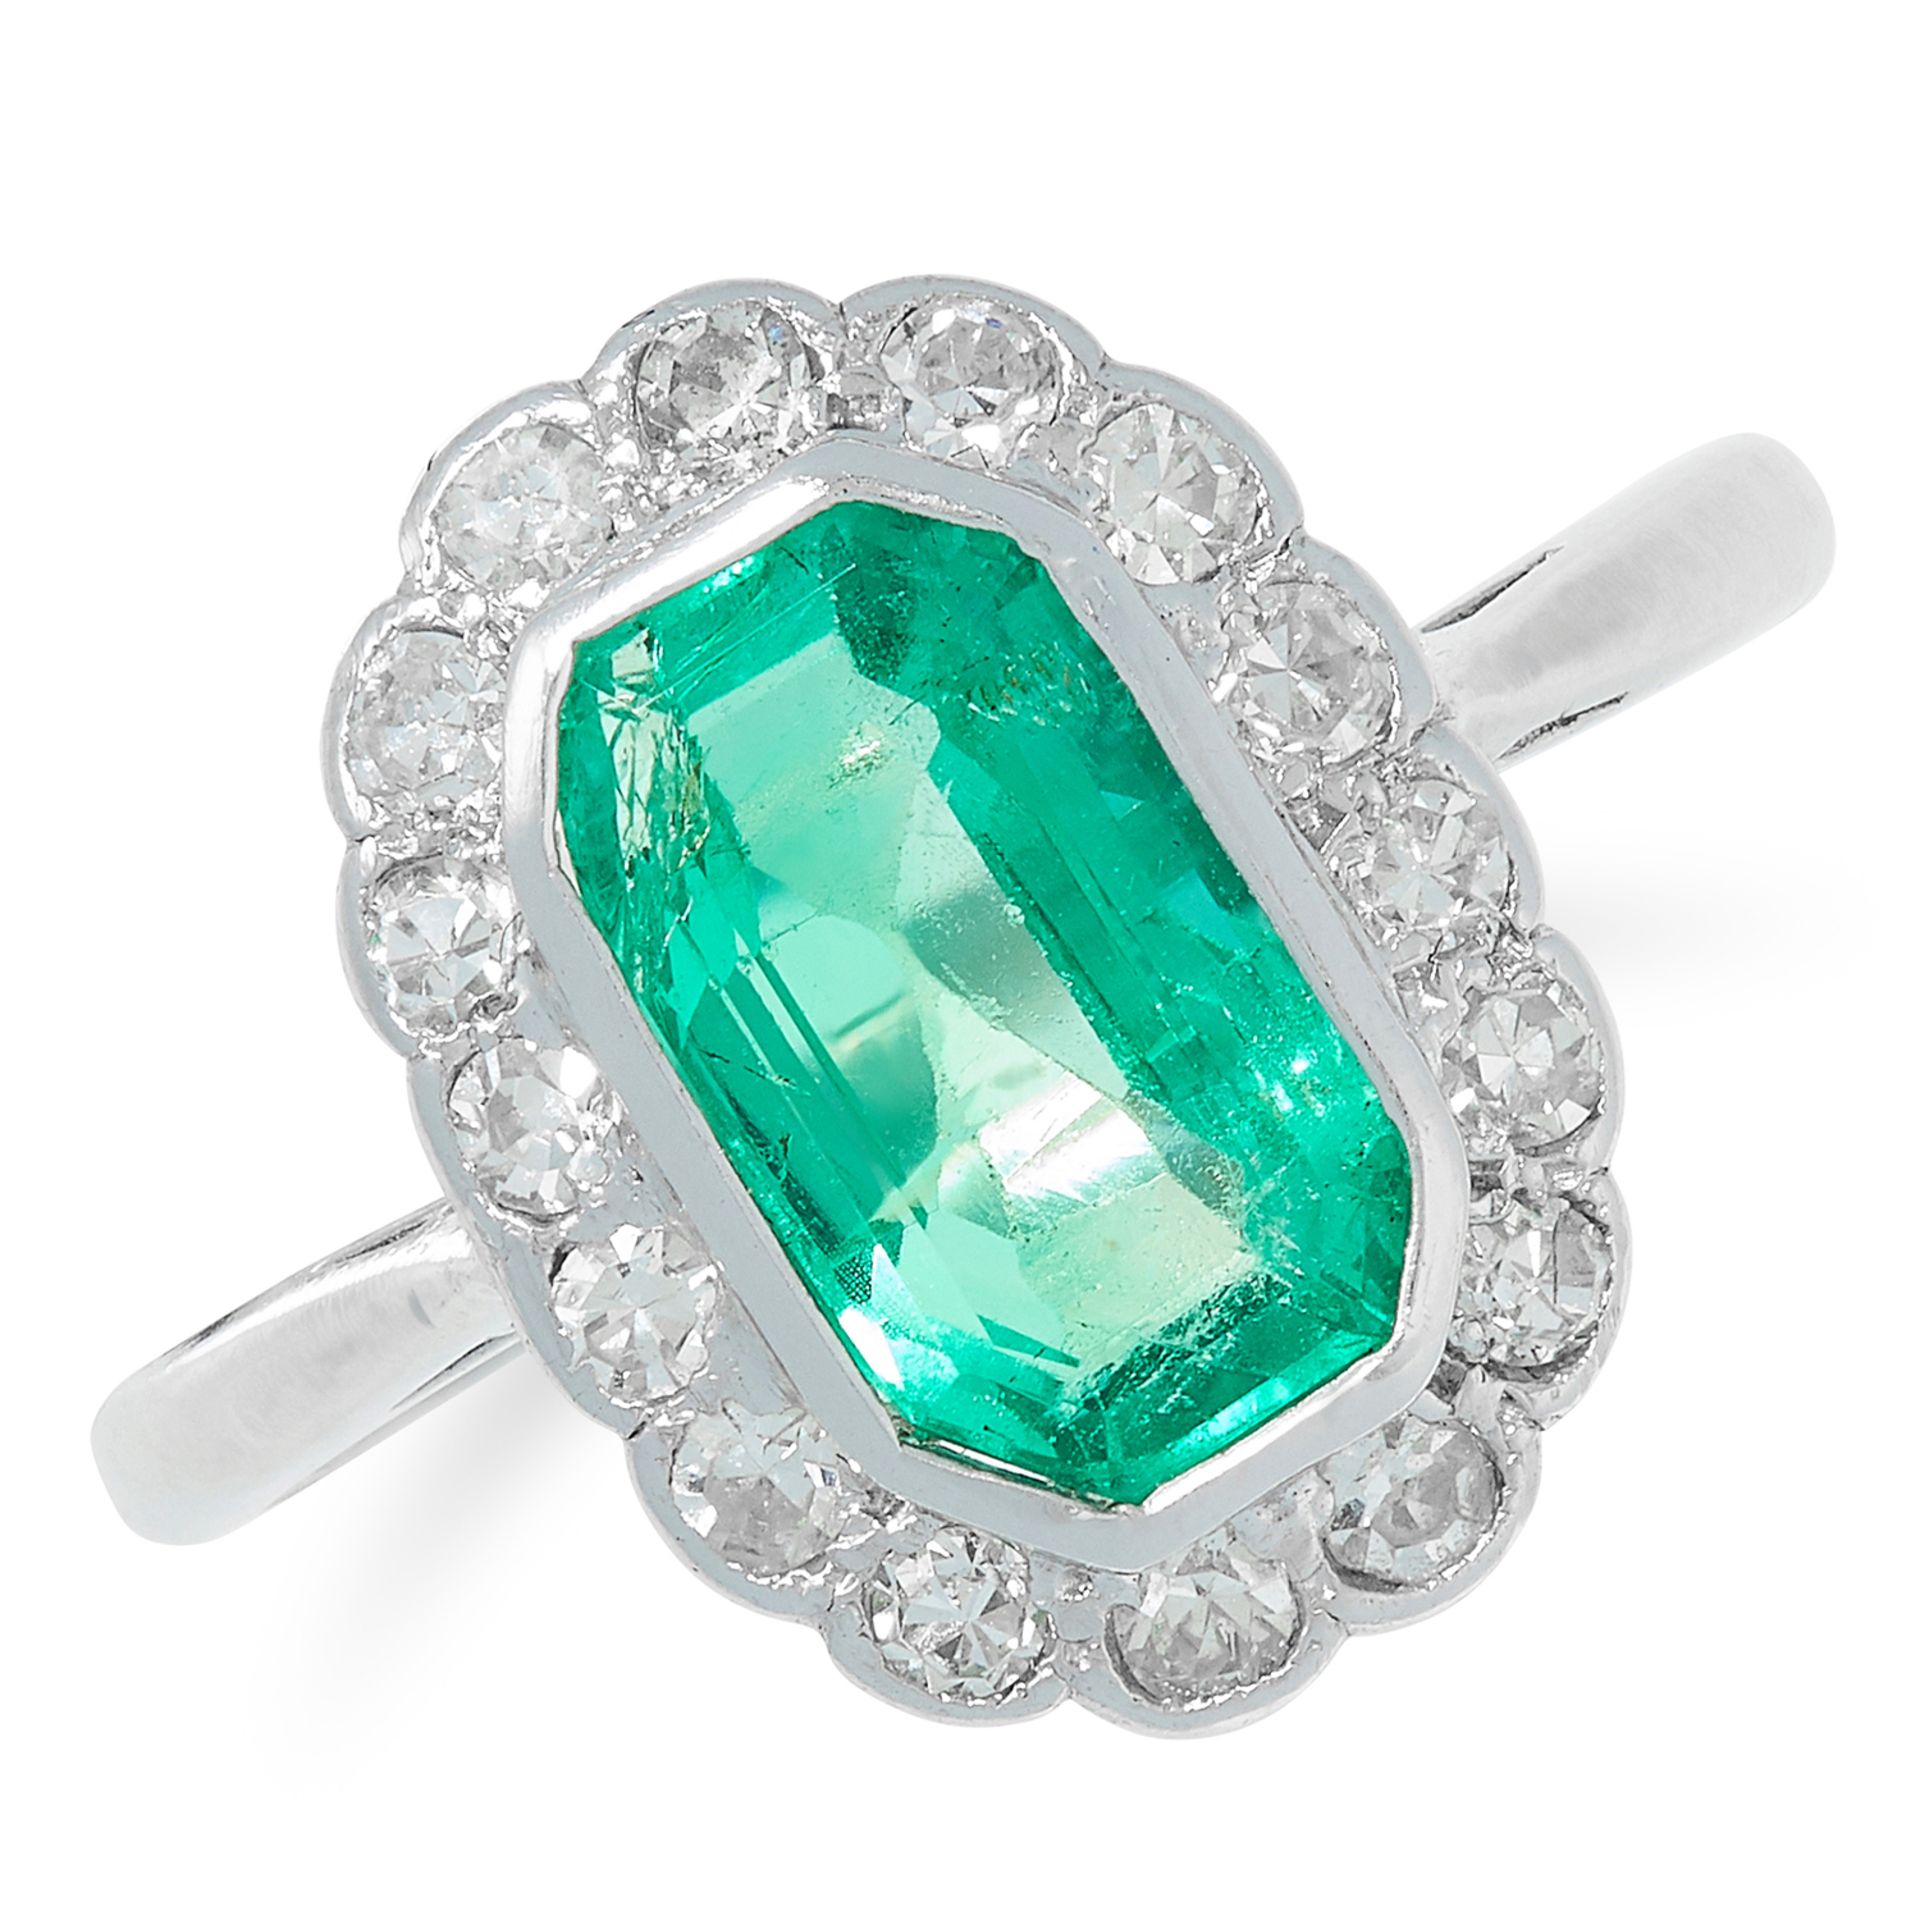 AN ANTIQUE COLOMBIAN EMERALD AND DIAMOND RING set with an emerald cut emerald of 1.62 carats